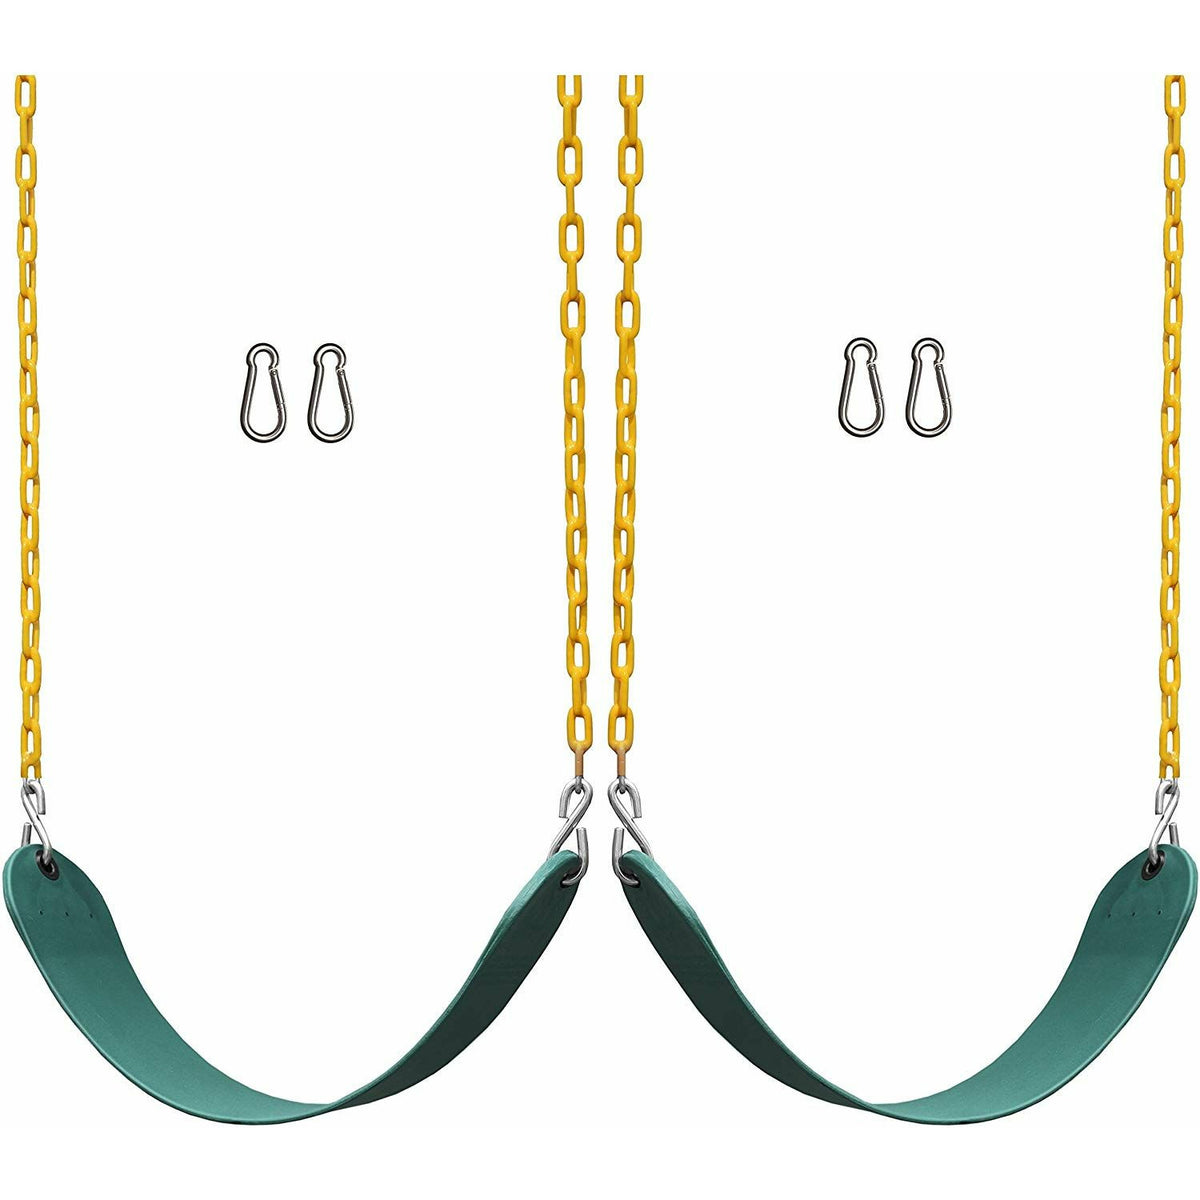 2 Pack Swings Seats Heavy Duty 66&quot; Chain Plastic Coated Playground Swing